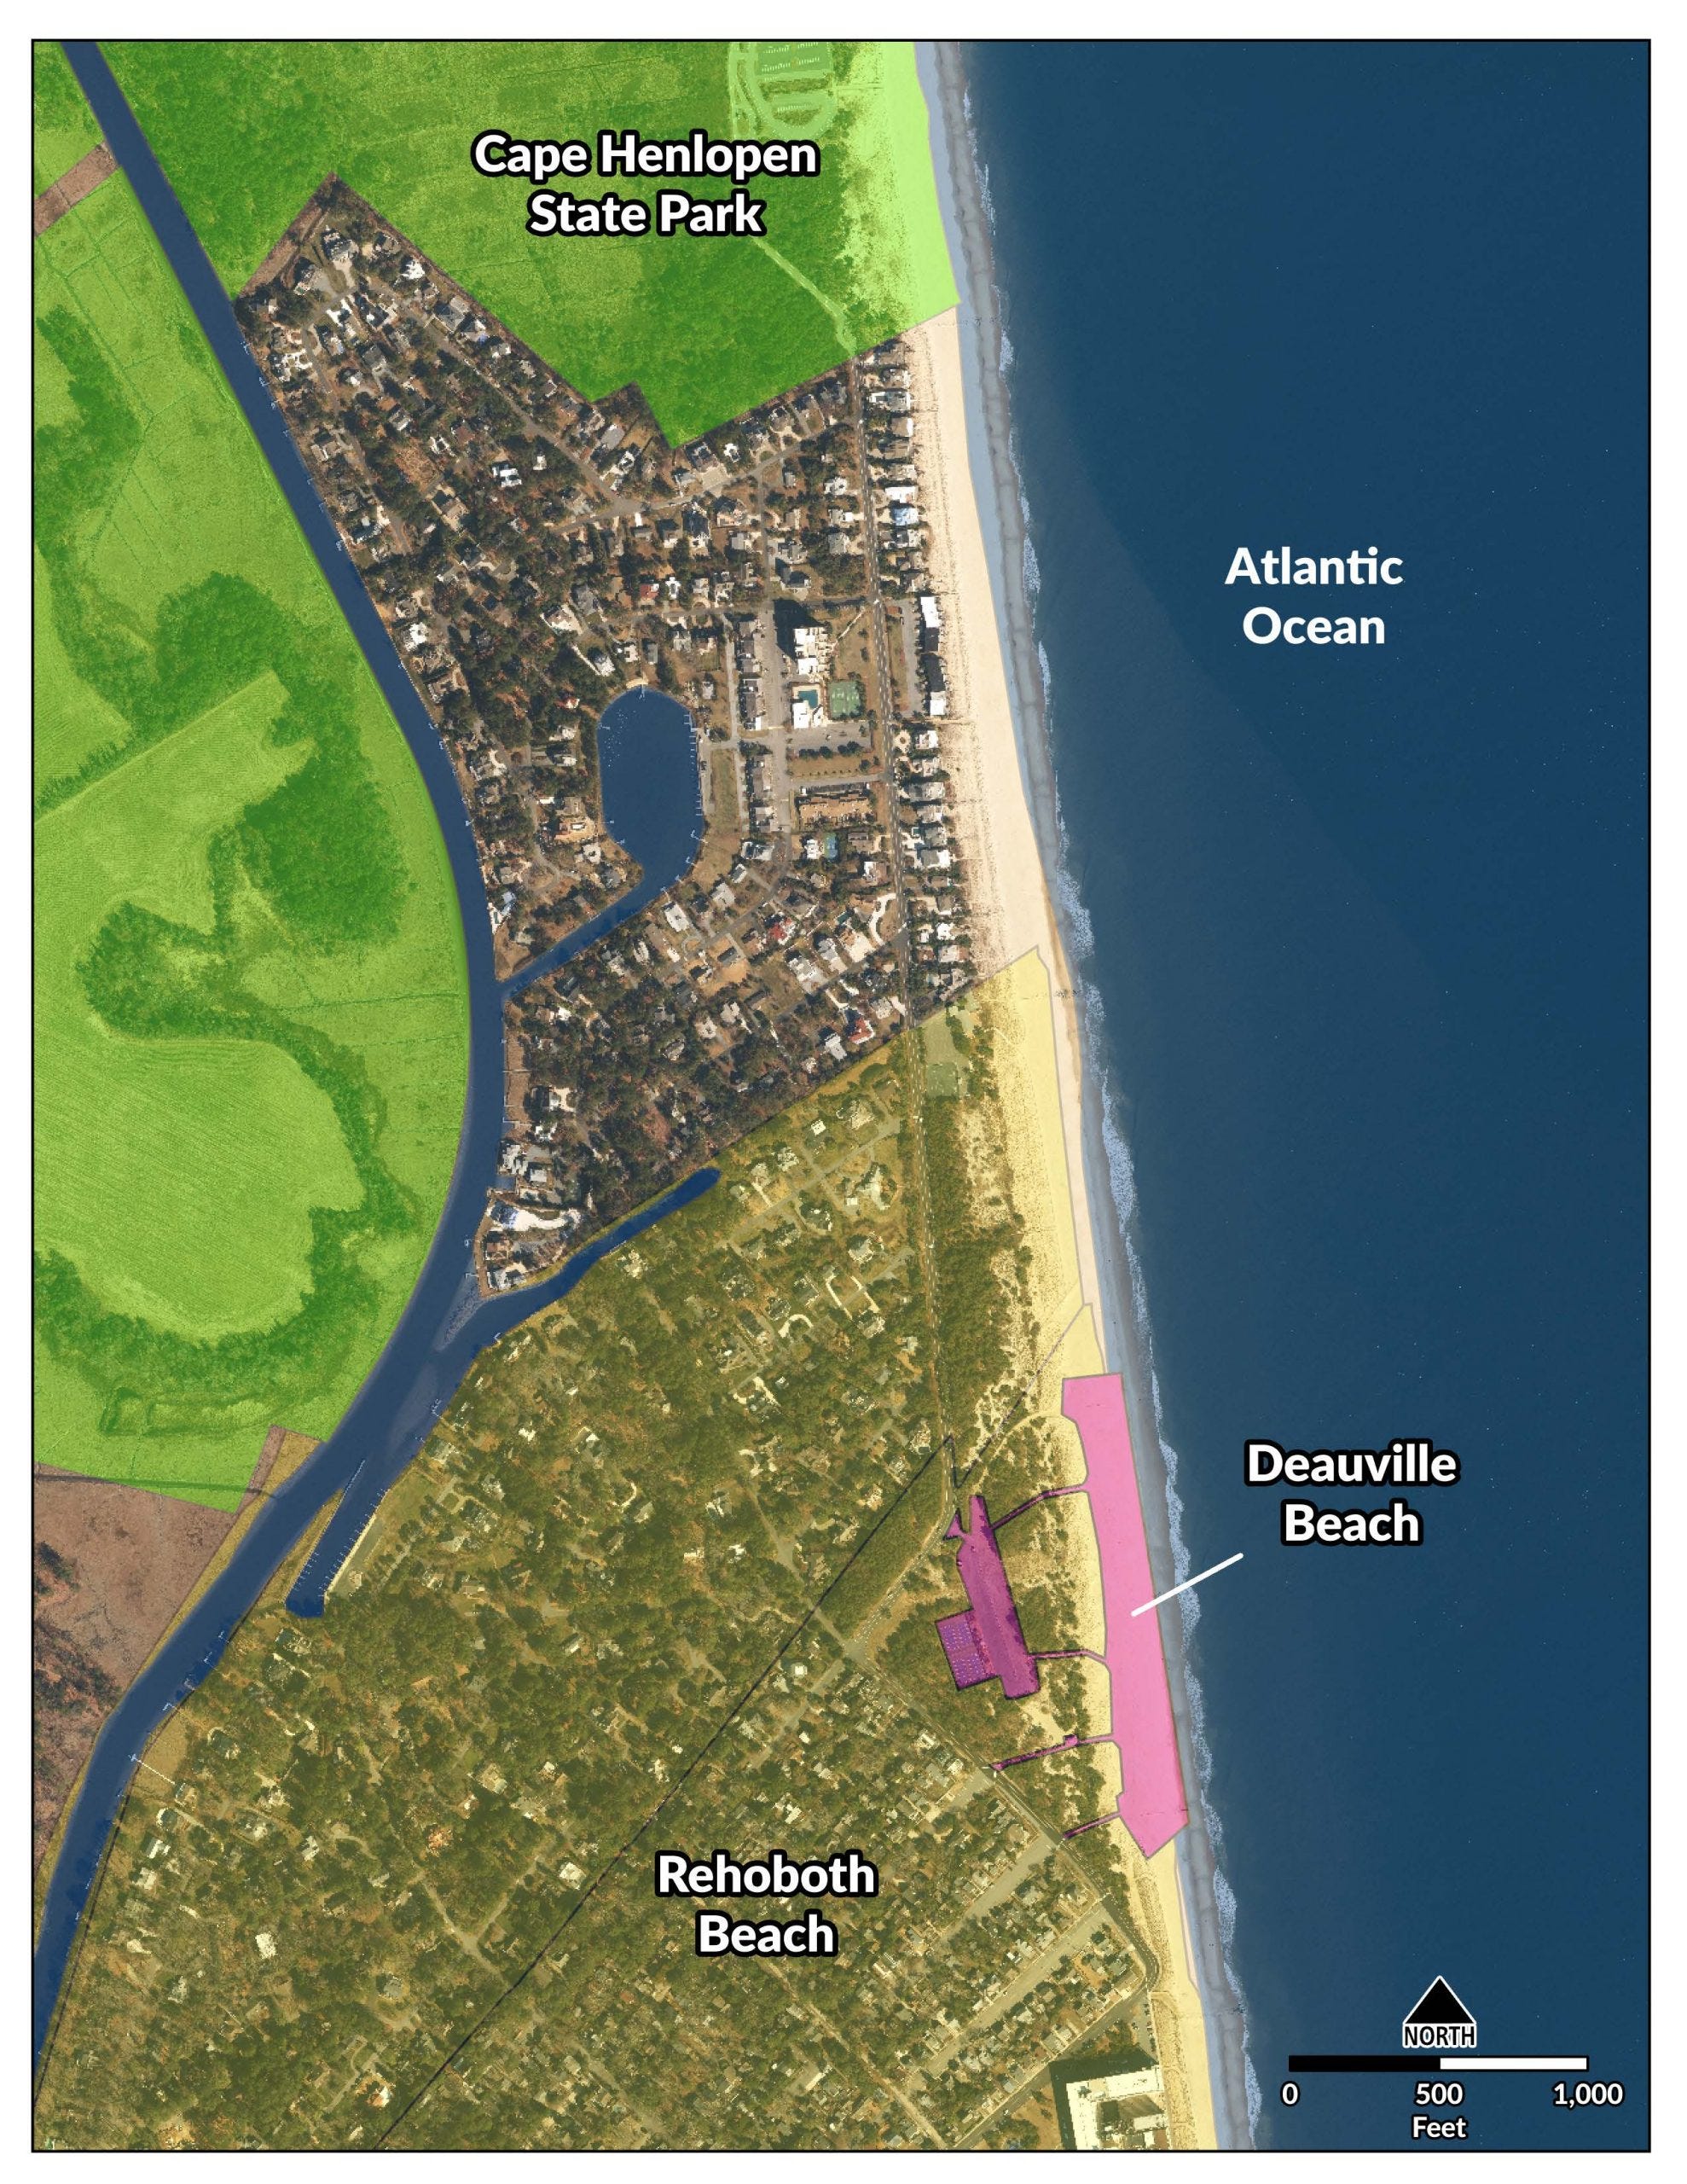 why rehoboth, after 48 years, will turn management of deauville beach over to the state